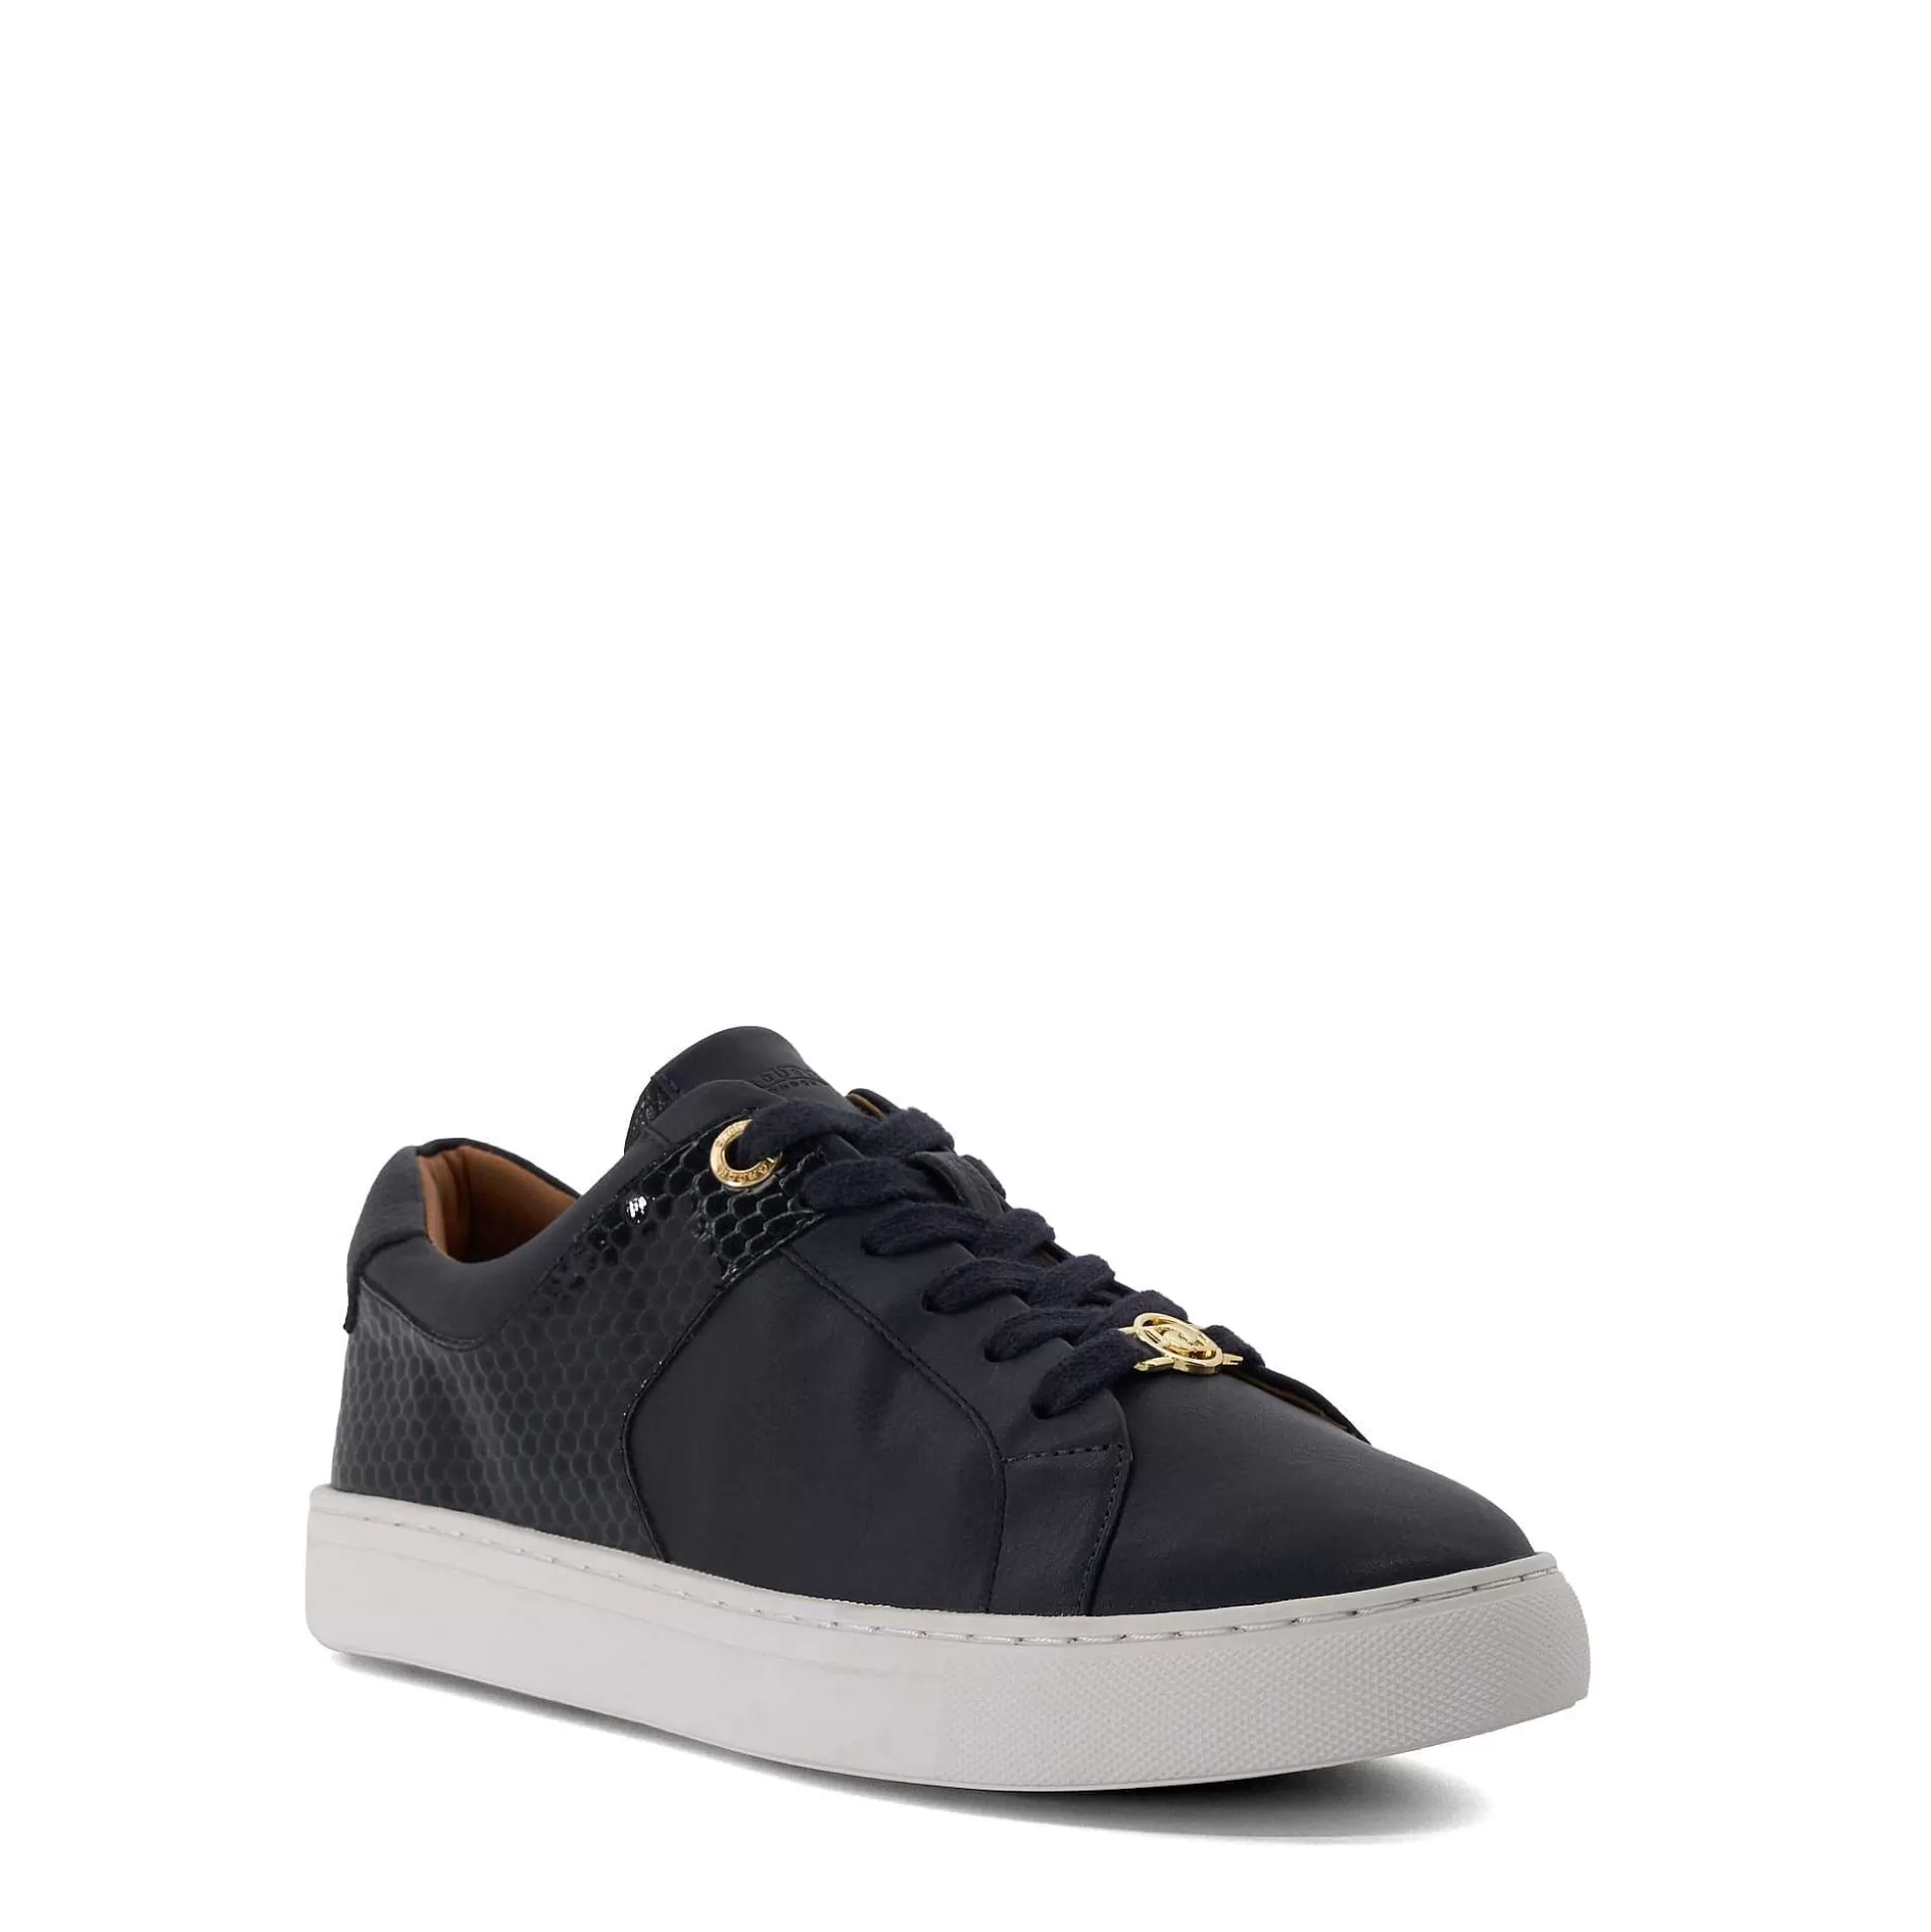 Dune London ELODIIE - NAVY-Women Flat Shoes | Trainers